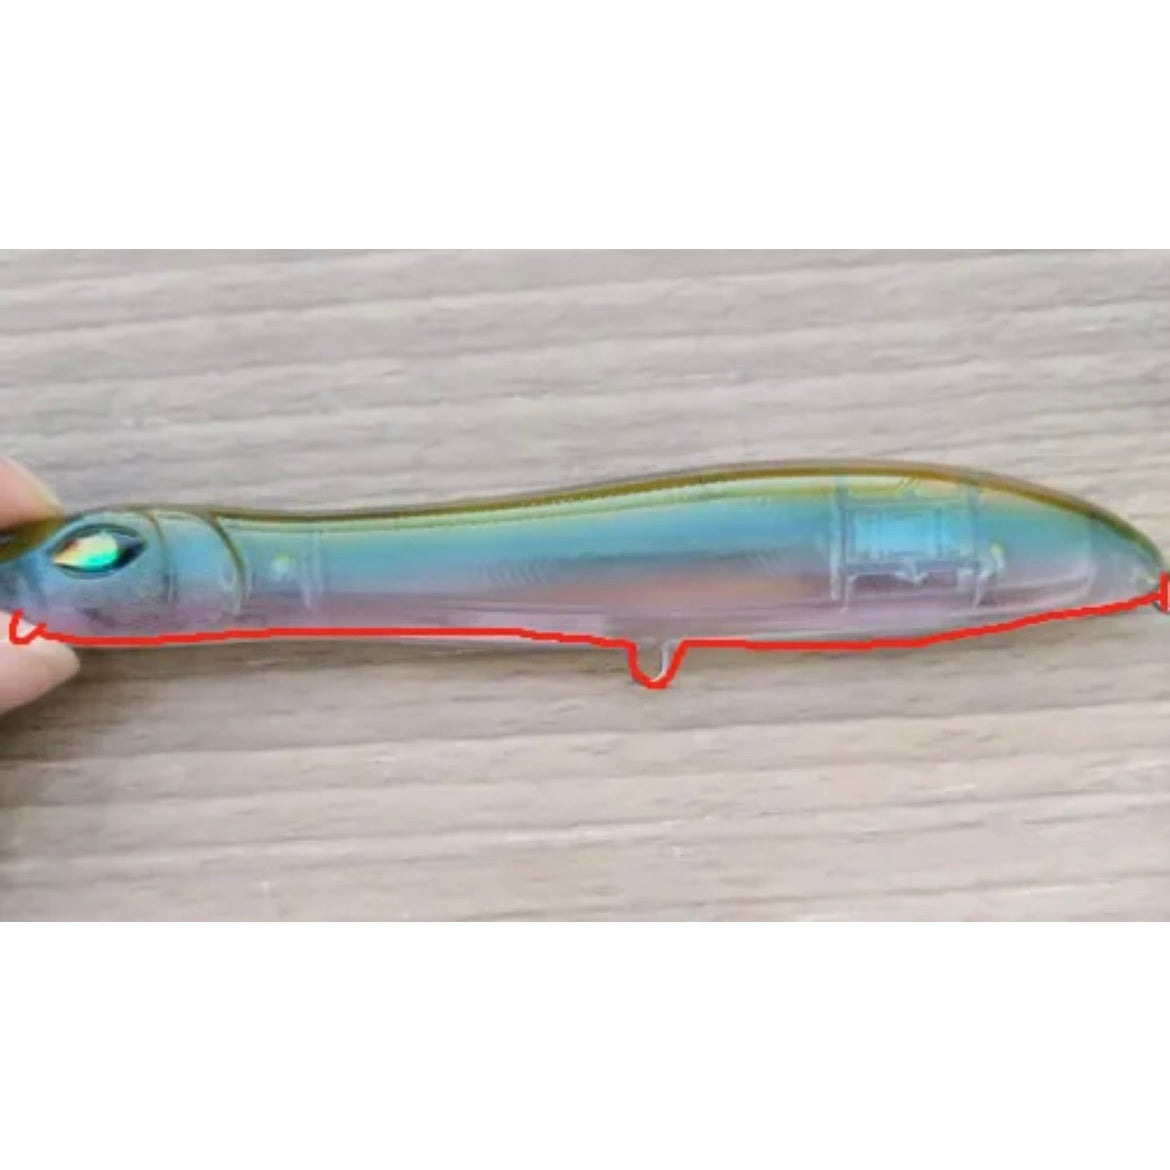 Large Surface Topwater Bass Lure 140mm 26g